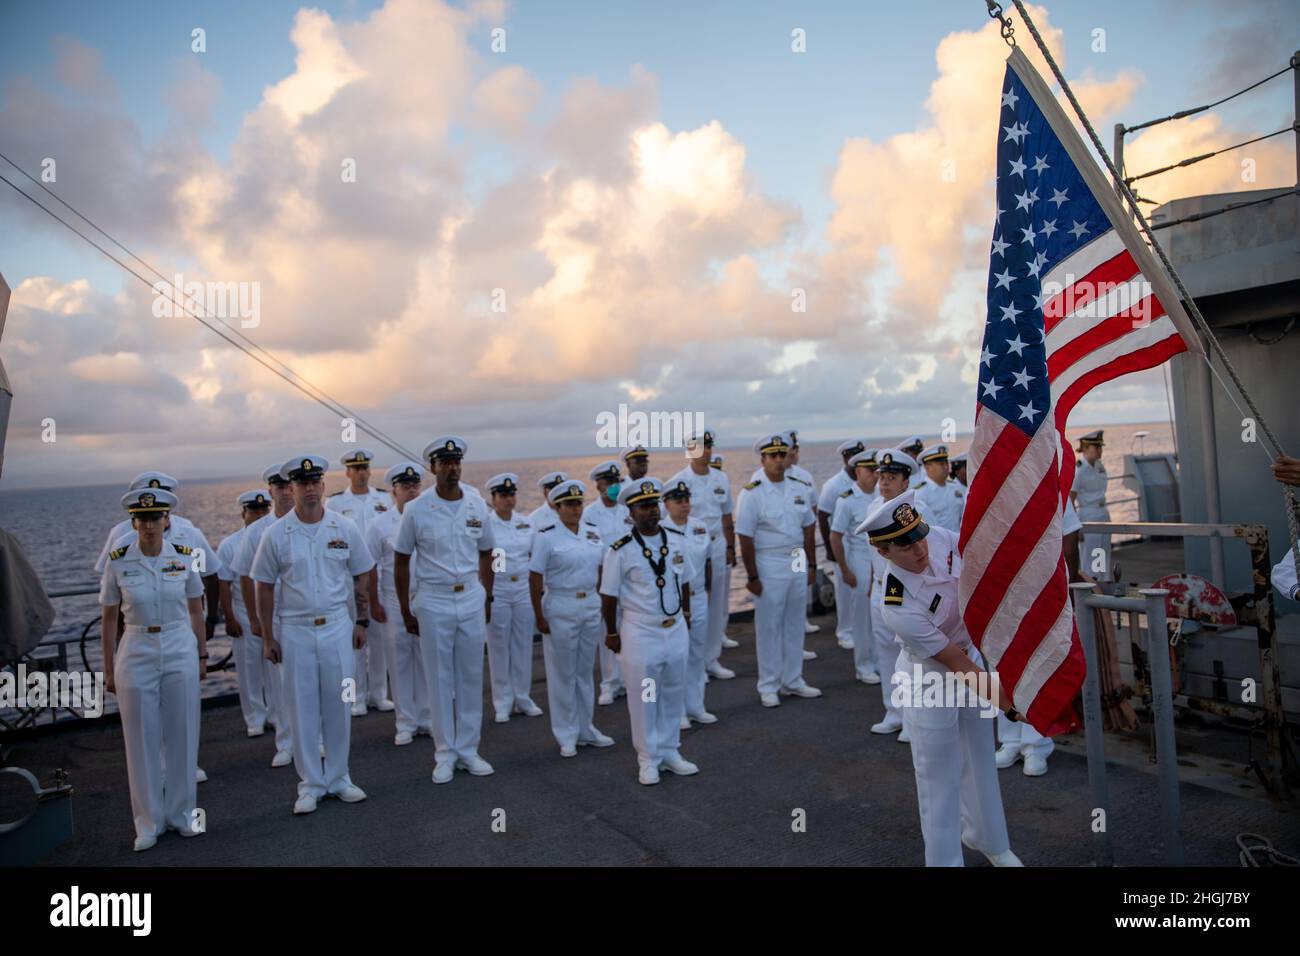 PACIFIC OCEAN (Aug. 13, 2021) U.S. Sailors assigned to amphibious dock landing ship USS Pearl Harbor (LSD 52), stand in formation during a memorial service honoring Chief Electrician’s Mate Stuart Hedley aboard Pearl Harbor, Aug. 13. Hedley served in the U.S. Navy for over twenty years and survived attack at Pearl Harbor, Hawaii, Dec. 7, 1941. Marines and Sailors of the 11th Marine Expeditionary Unit (MEU) and Essex Amphibious Ready Group (ARG) are underway conducting routine operations. Stock Photo